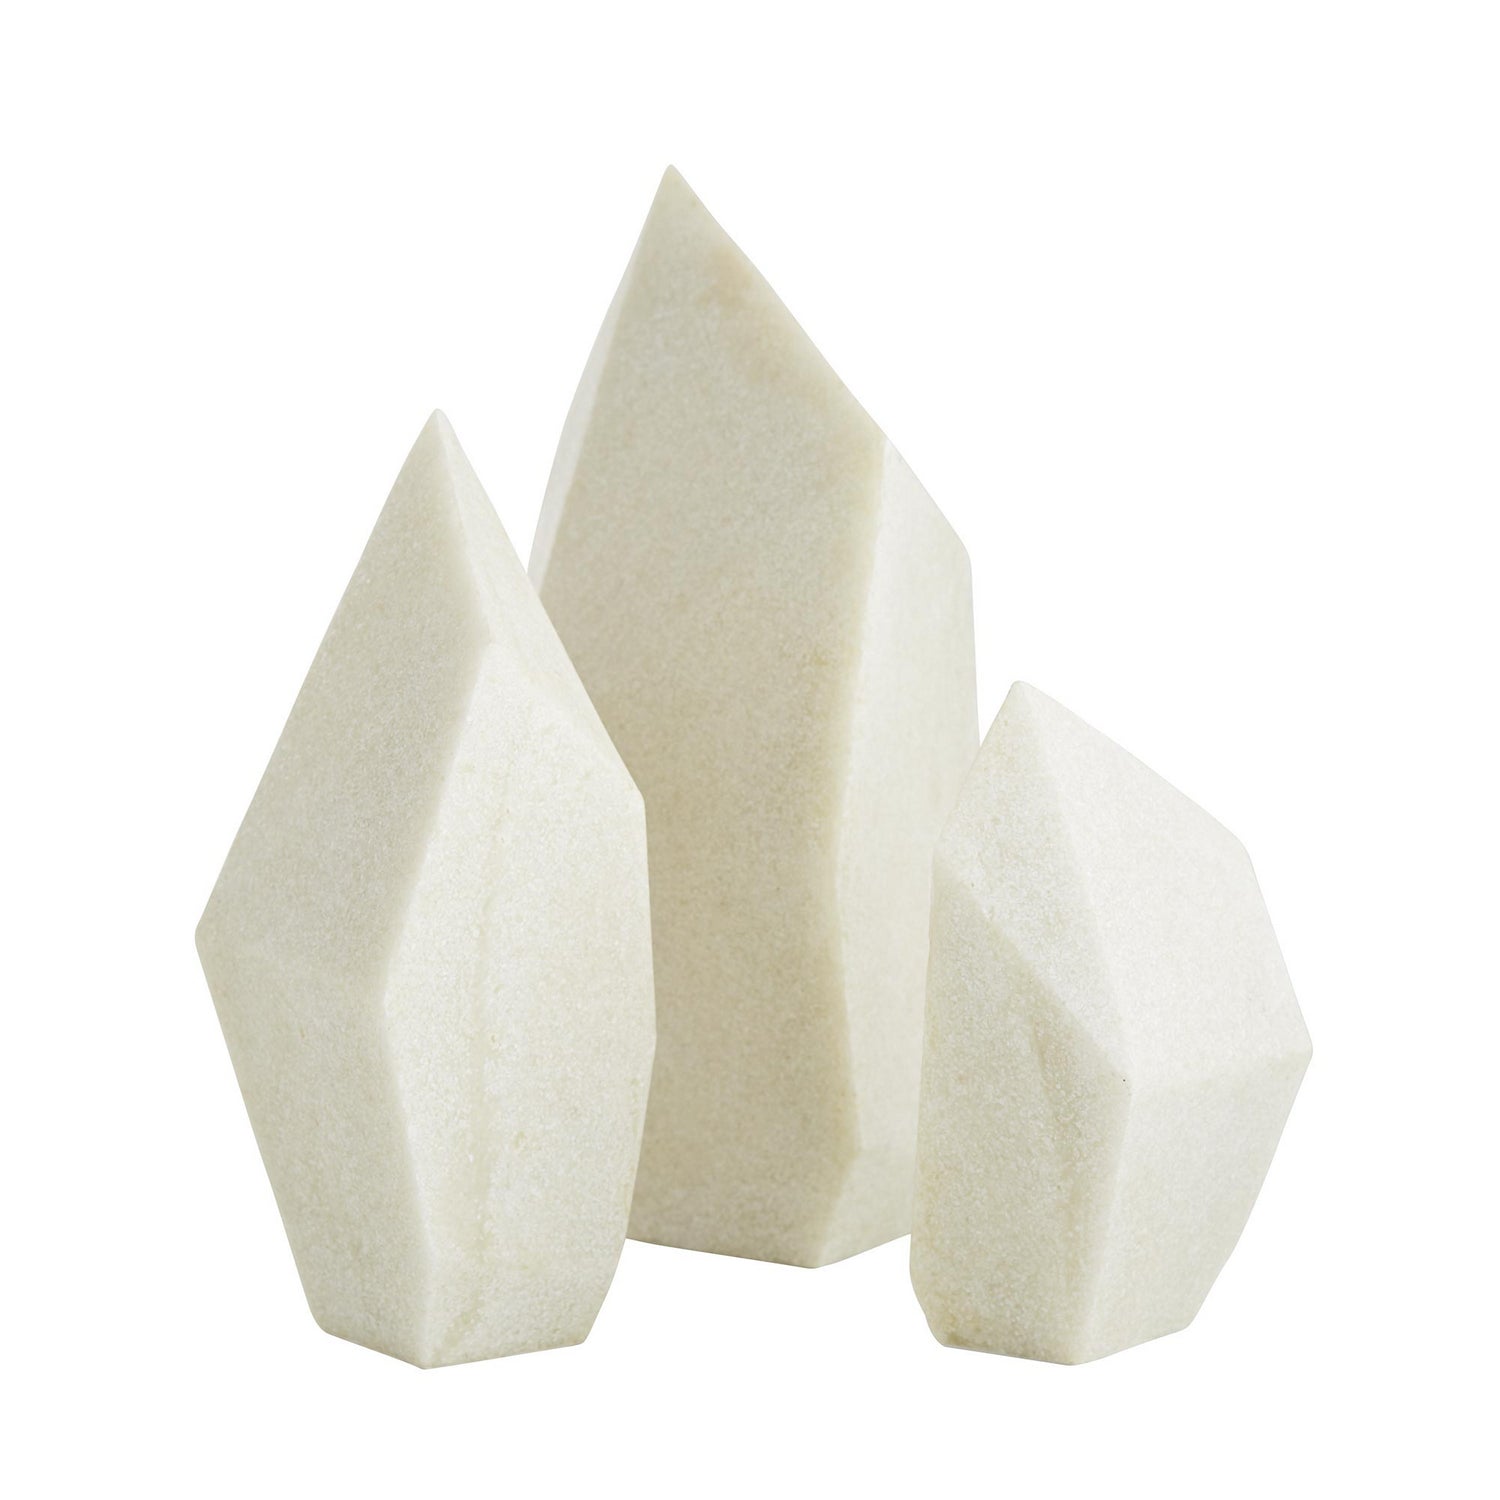 Sculptures, Set of 3 from the Nerine collection in Faux Marble finish